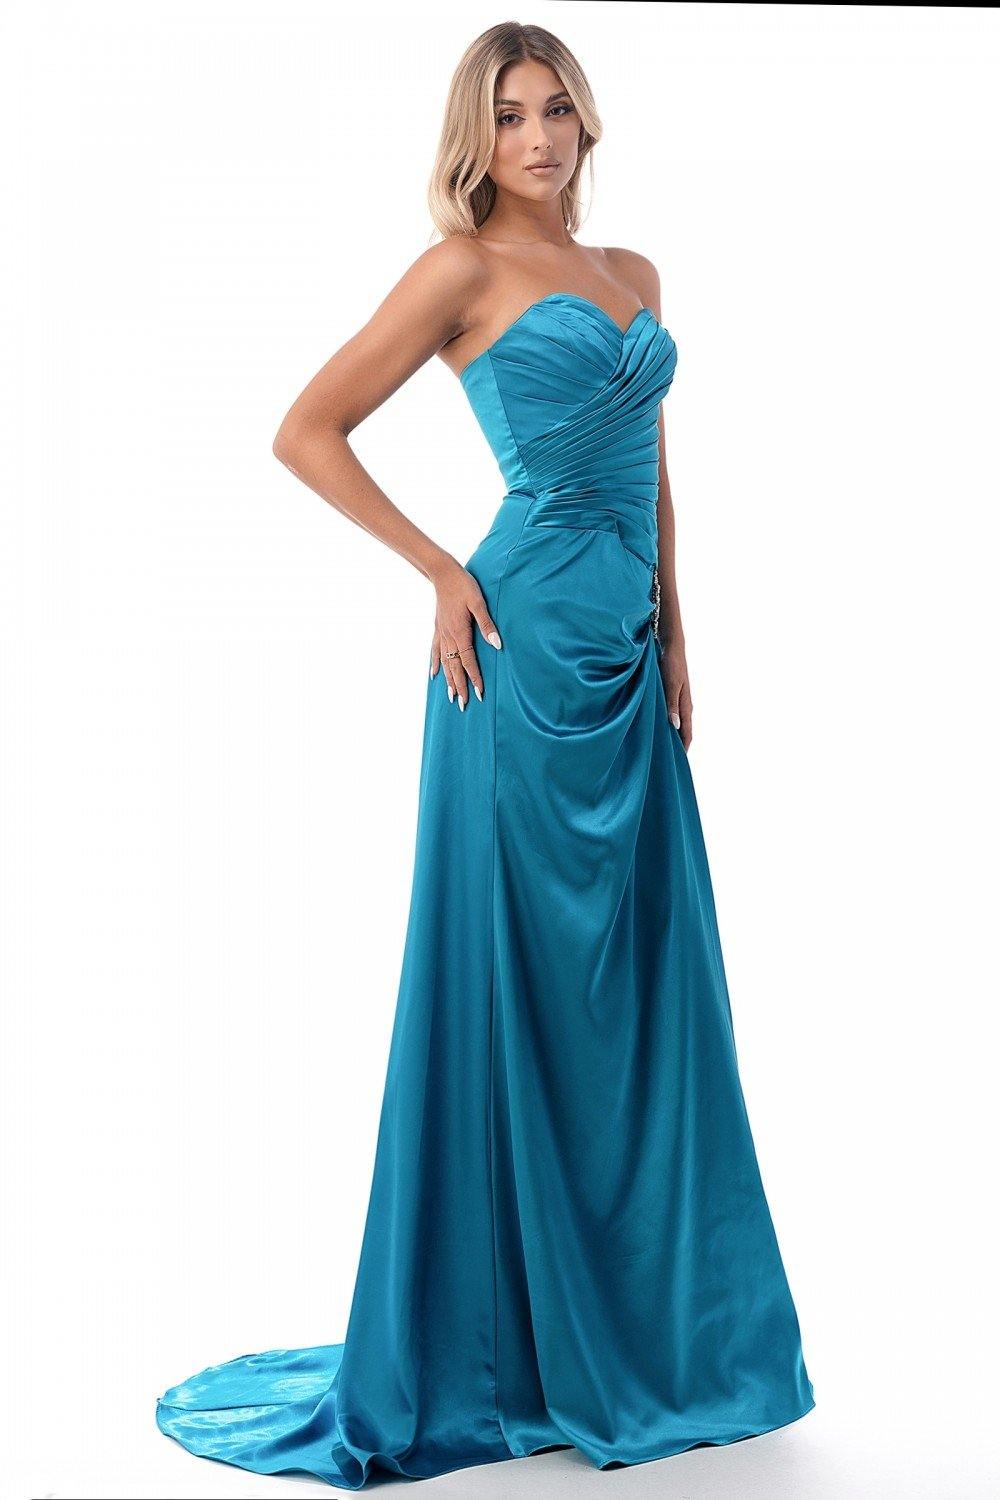 Long Strapless Formal Dress Bridesmaid - The Dress Outlet